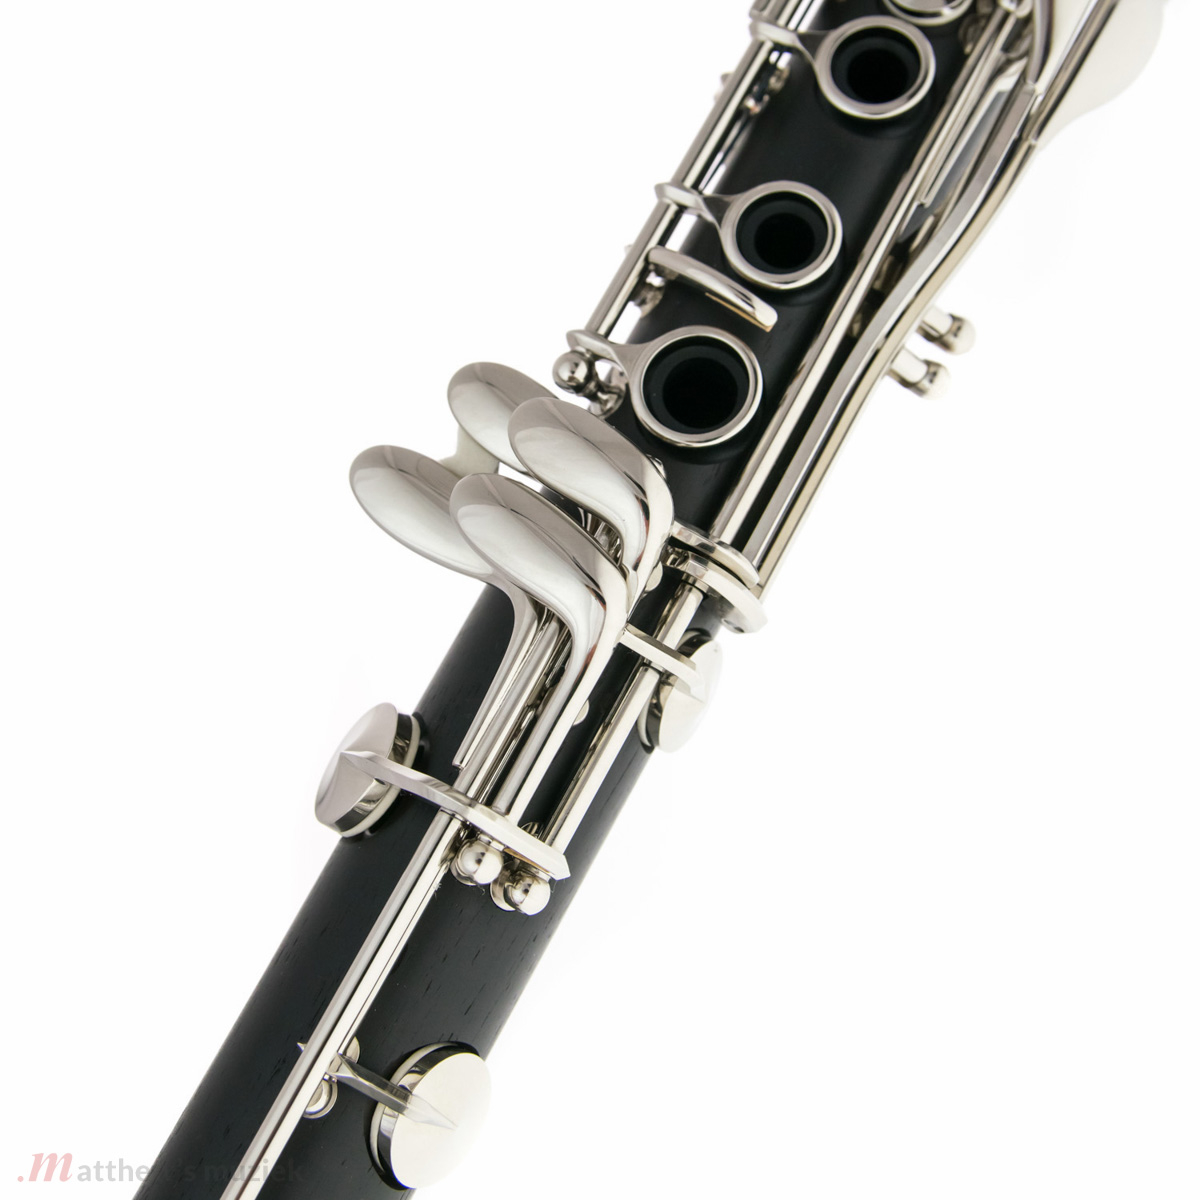 Buffet Crampon Bb Clarinet - E11 with Nickel Plated Keys